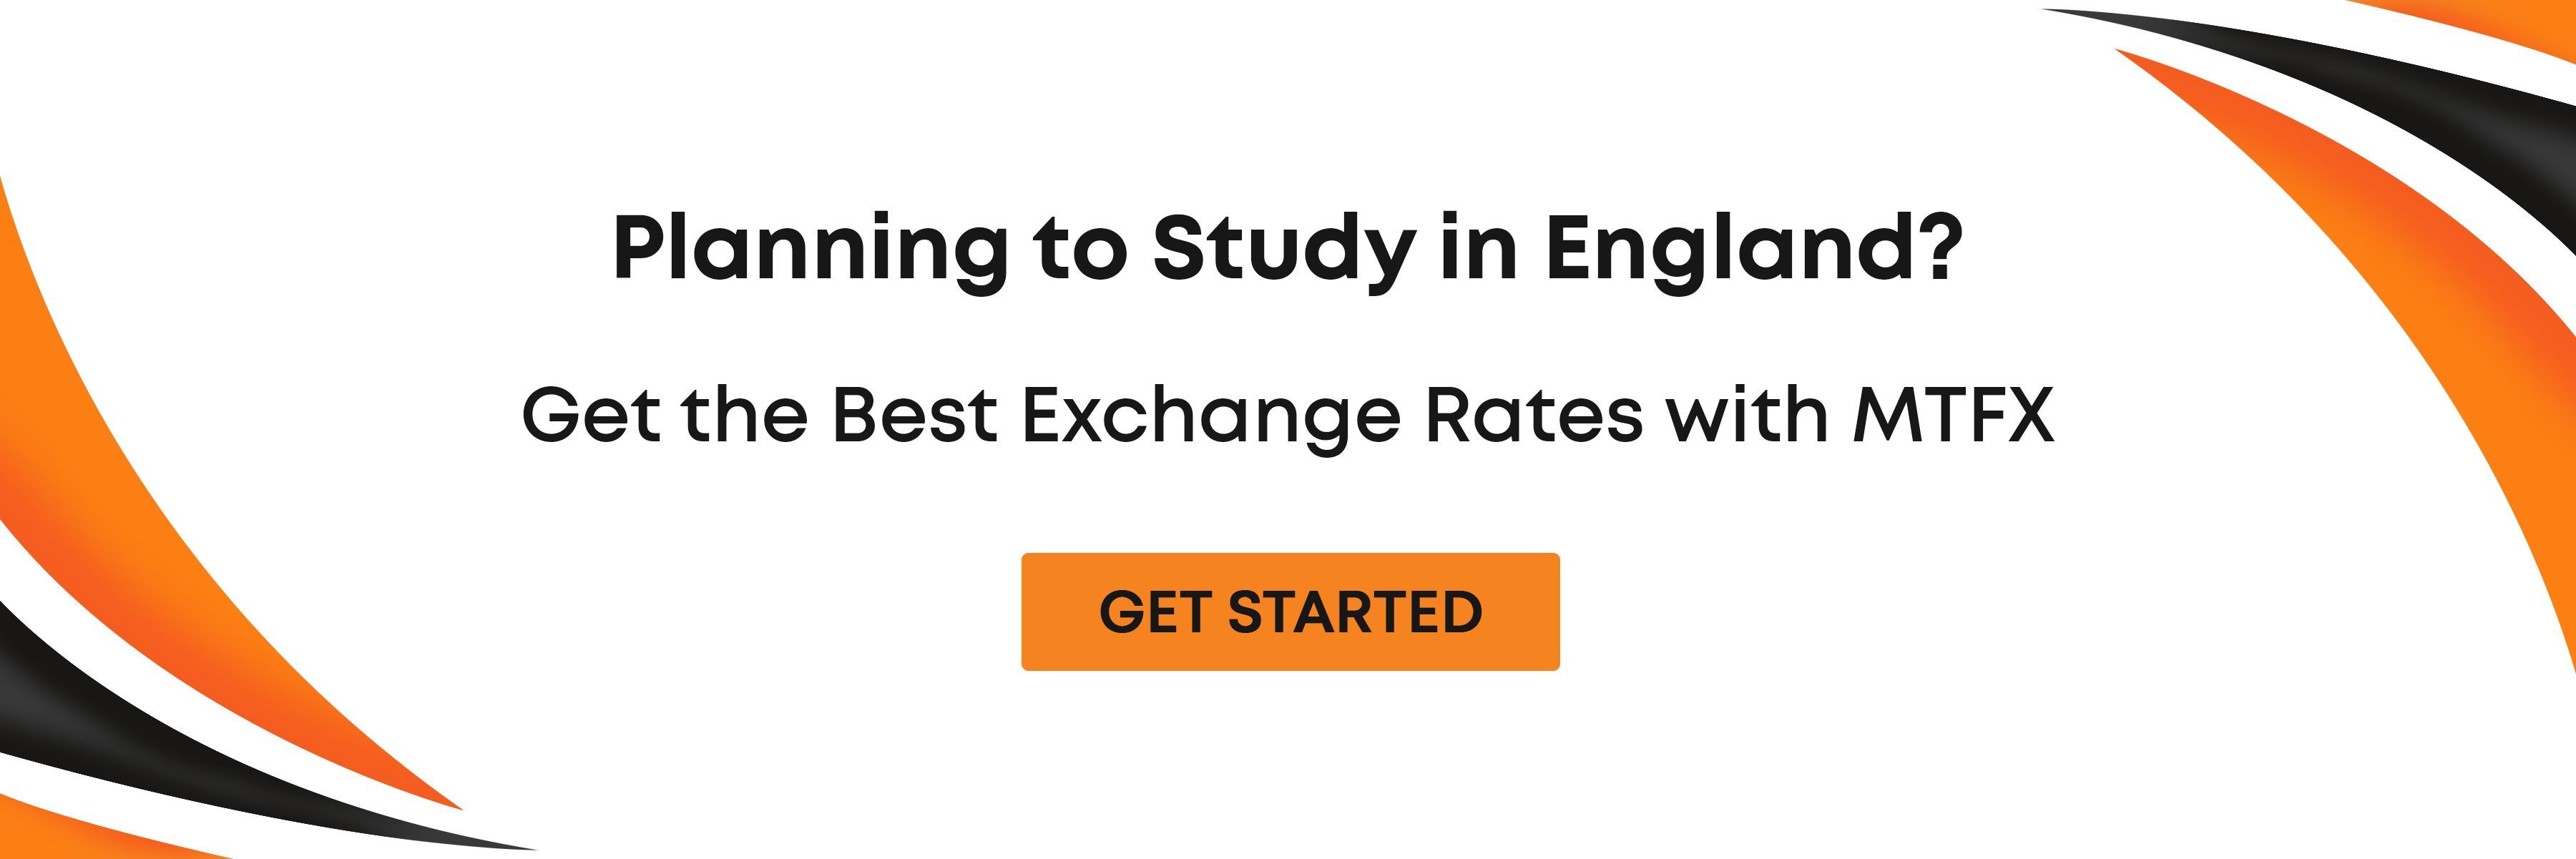 Planning to study in England?